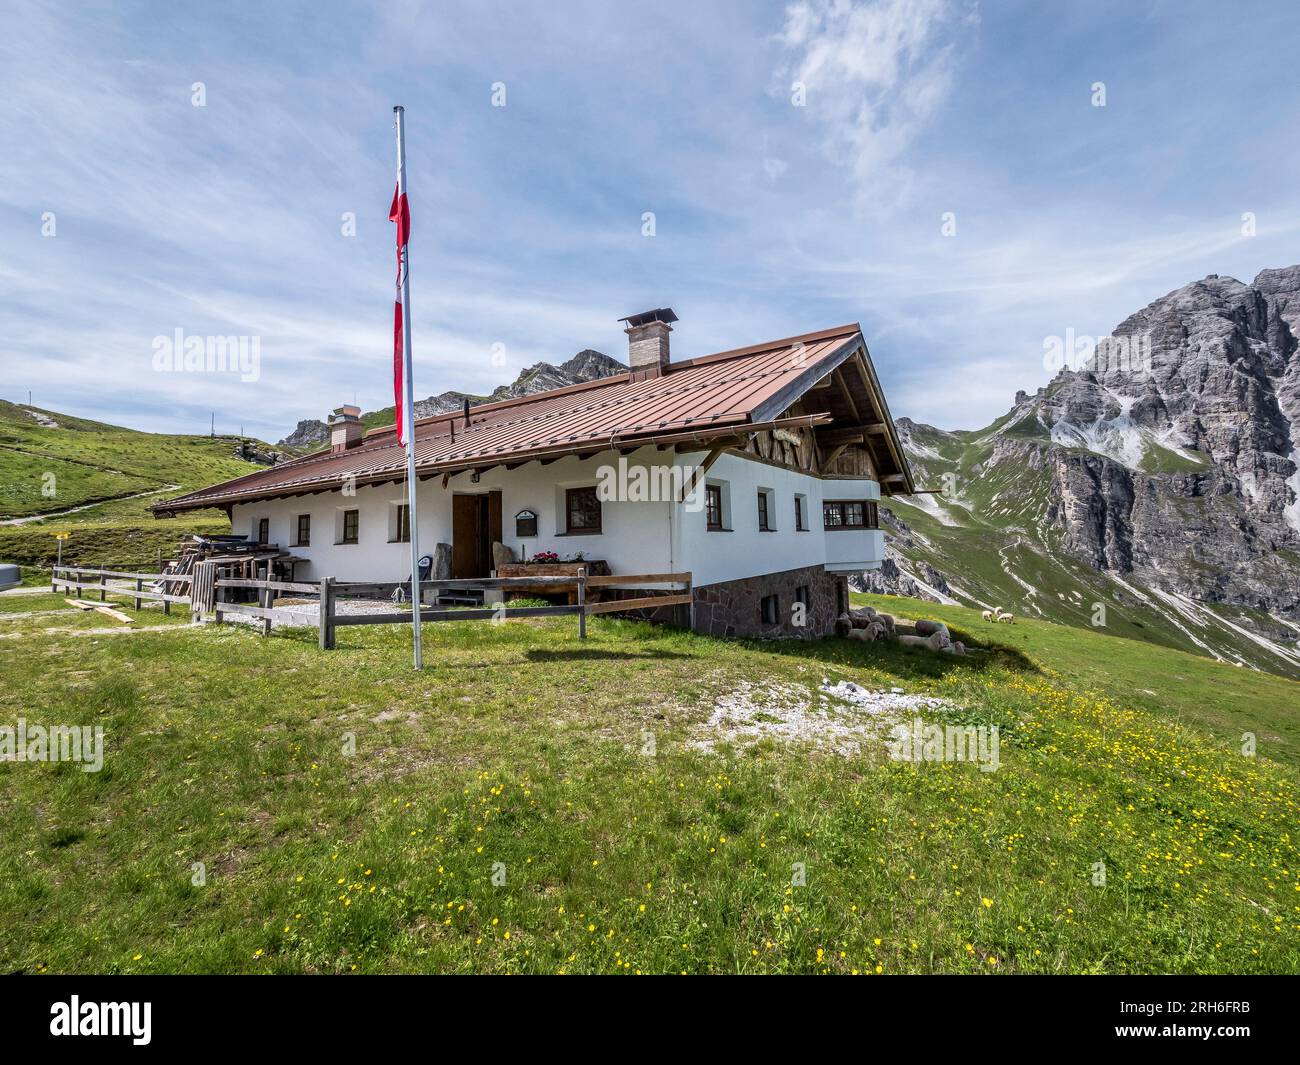 This is the privately owned Senn Hut mountain refuge on the Kreuzjoch in the Kalkkogel mountains above the village of Fulpmes in the Stubaital valley Stock Photo